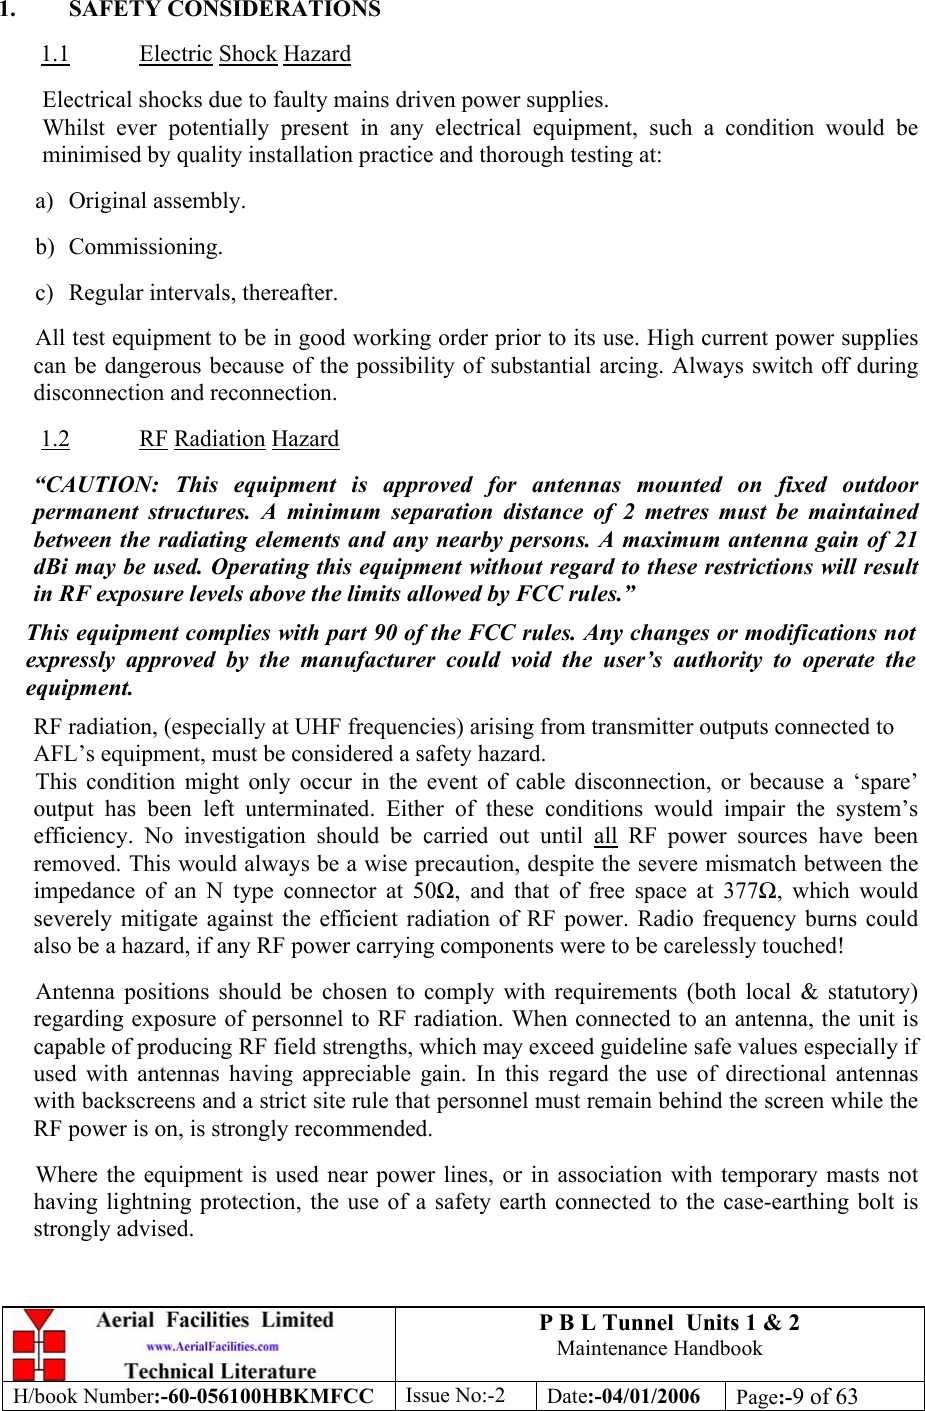 P B L Tunnel  Units 1 &amp; 2 Maintenance Handbook H/book Number:-60-056100HBKMFCC  Issue No:-2  Date:-04/01/2006  Page:-9 of 63   1. SAFETY CONSIDERATIONS  1.1 Electric Shock Hazard  Electrical shocks due to faulty mains driven power supplies. Whilst ever potentially present in any electrical equipment, such a condition would be minimised by quality installation practice and thorough testing at:  a) Original assembly.  b) Commissioning.  c)  Regular intervals, thereafter.  All test equipment to be in good working order prior to its use. High current power supplies can be dangerous because of the possibility of substantial arcing. Always switch off during disconnection and reconnection.  1.2 RF Radiation Hazard  “CAUTION: This equipment is approved for antennas mounted on fixed outdoor permanent structures. A minimum separation distance of 2 metres must be maintained between the radiating elements and any nearby persons. A maximum antenna gain of 21 dBi may be used. Operating this equipment without regard to these restrictions will result in RF exposure levels above the limits allowed by FCC rules.” This equipment complies with part 90 of the FCC rules. Any changes or modifications not expressly approved by the manufacturer could void the user’s authority to operate the equipment. RF radiation, (especially at UHF frequencies) arising from transmitter outputs connected to AFL’s equipment, must be considered a safety hazard. This condition might only occur in the event of cable disconnection, or because a ‘spare’ output has been left unterminated. Either of these conditions would impair the system’s efficiency. No investigation should be carried out until all RF power sources have been removed. This would always be a wise precaution, despite the severe mismatch between the impedance of an N type connector at 50, and that of free space at 377, which would severely mitigate against the efficient radiation of RF power. Radio frequency burns could also be a hazard, if any RF power carrying components were to be carelessly touched!  Antenna positions should be chosen to comply with requirements (both local &amp; statutory) regarding exposure of personnel to RF radiation. When connected to an antenna, the unit is capable of producing RF field strengths, which may exceed guideline safe values especially if used with antennas having appreciable gain. In this regard the use of directional antennas with backscreens and a strict site rule that personnel must remain behind the screen while the RF power is on, is strongly recommended.  Where the equipment is used near power lines, or in association with temporary masts not having lightning protection, the use of a safety earth connected to the case-earthing bolt is strongly advised. 